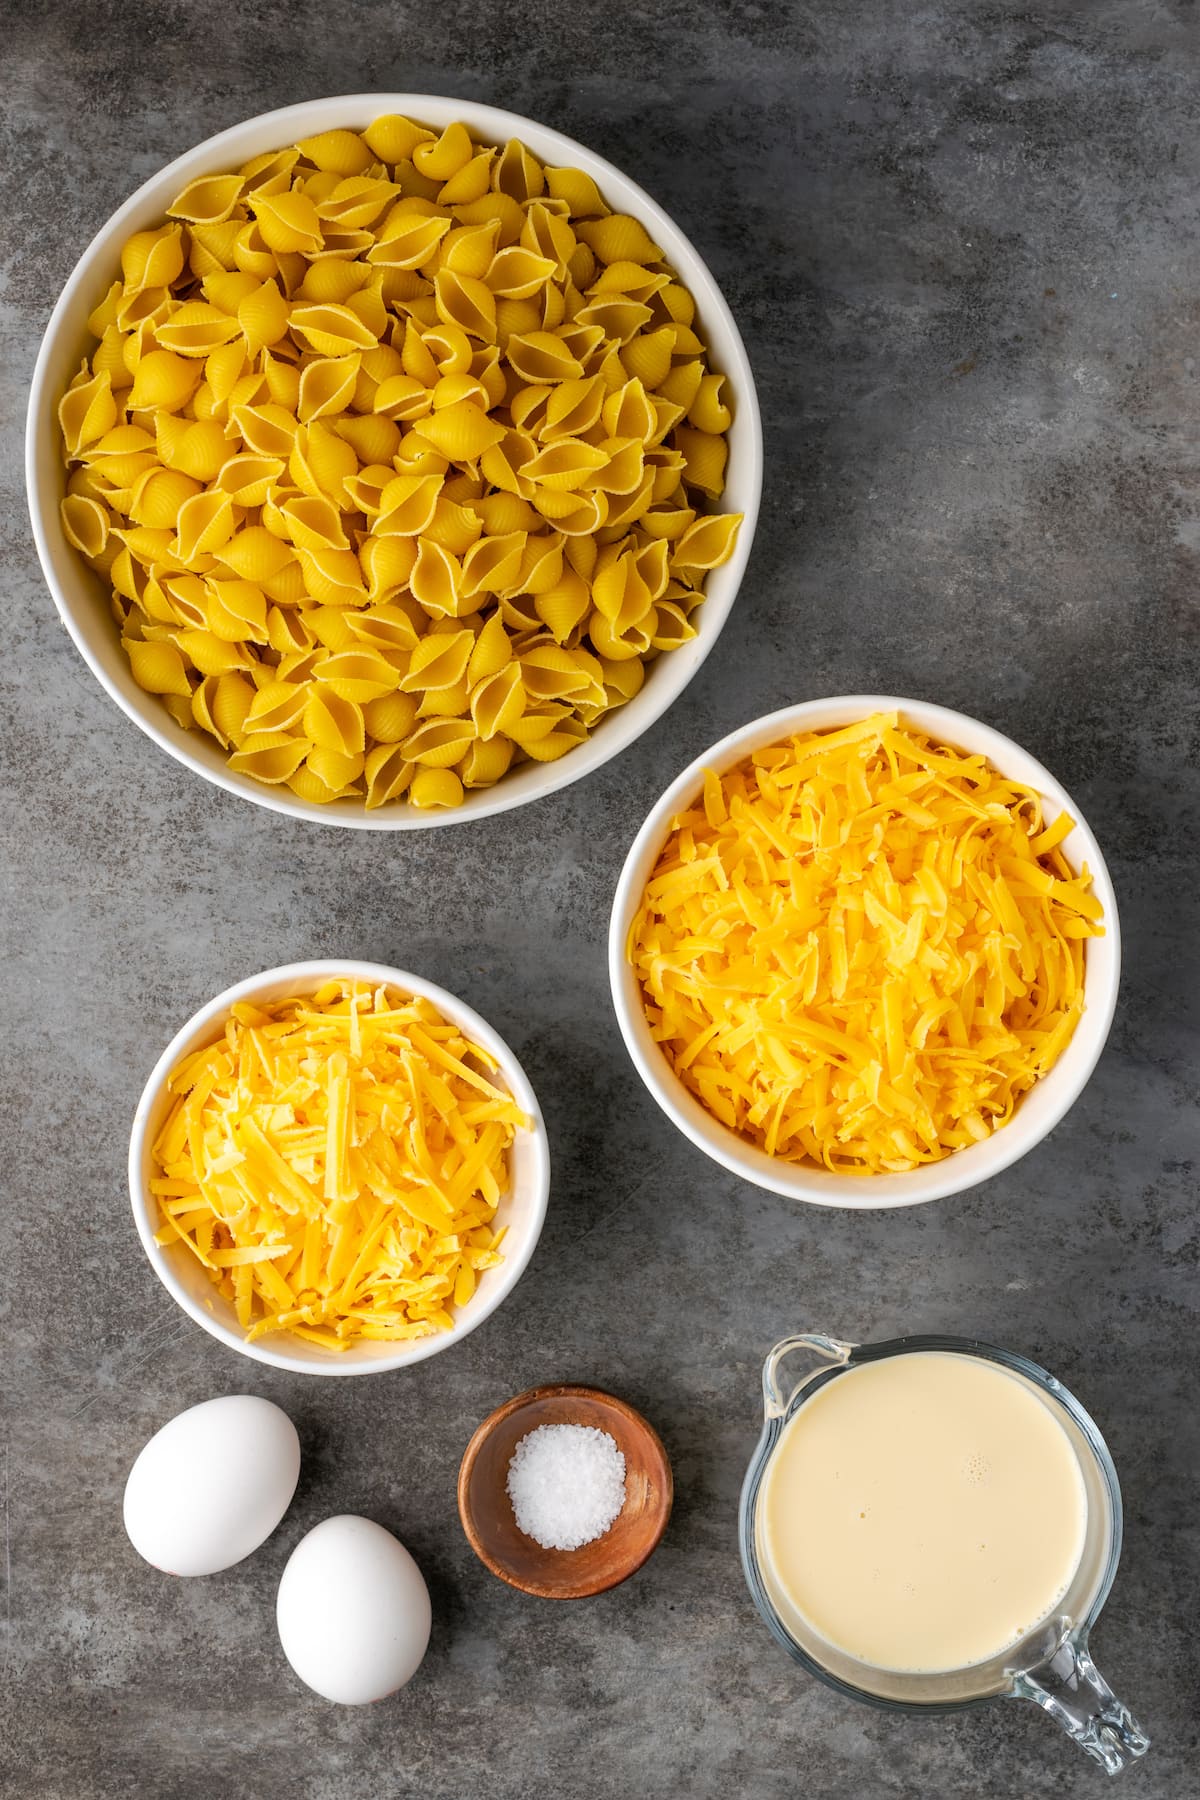 The ingredients for easy stovetop mac and cheese.